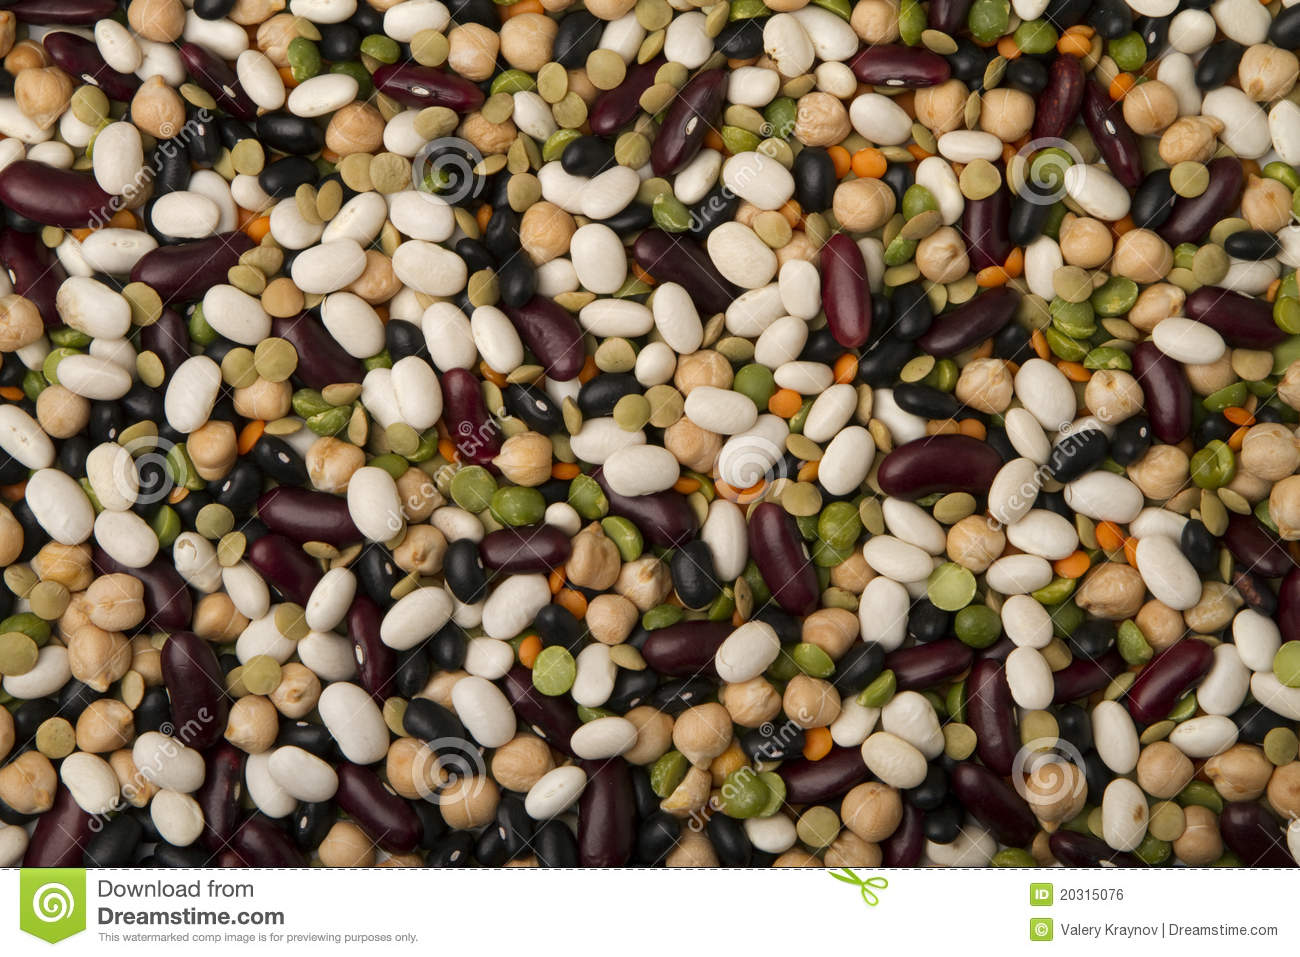 Mixed Dried Beans Royalty Free Stock Image   Image  20315076